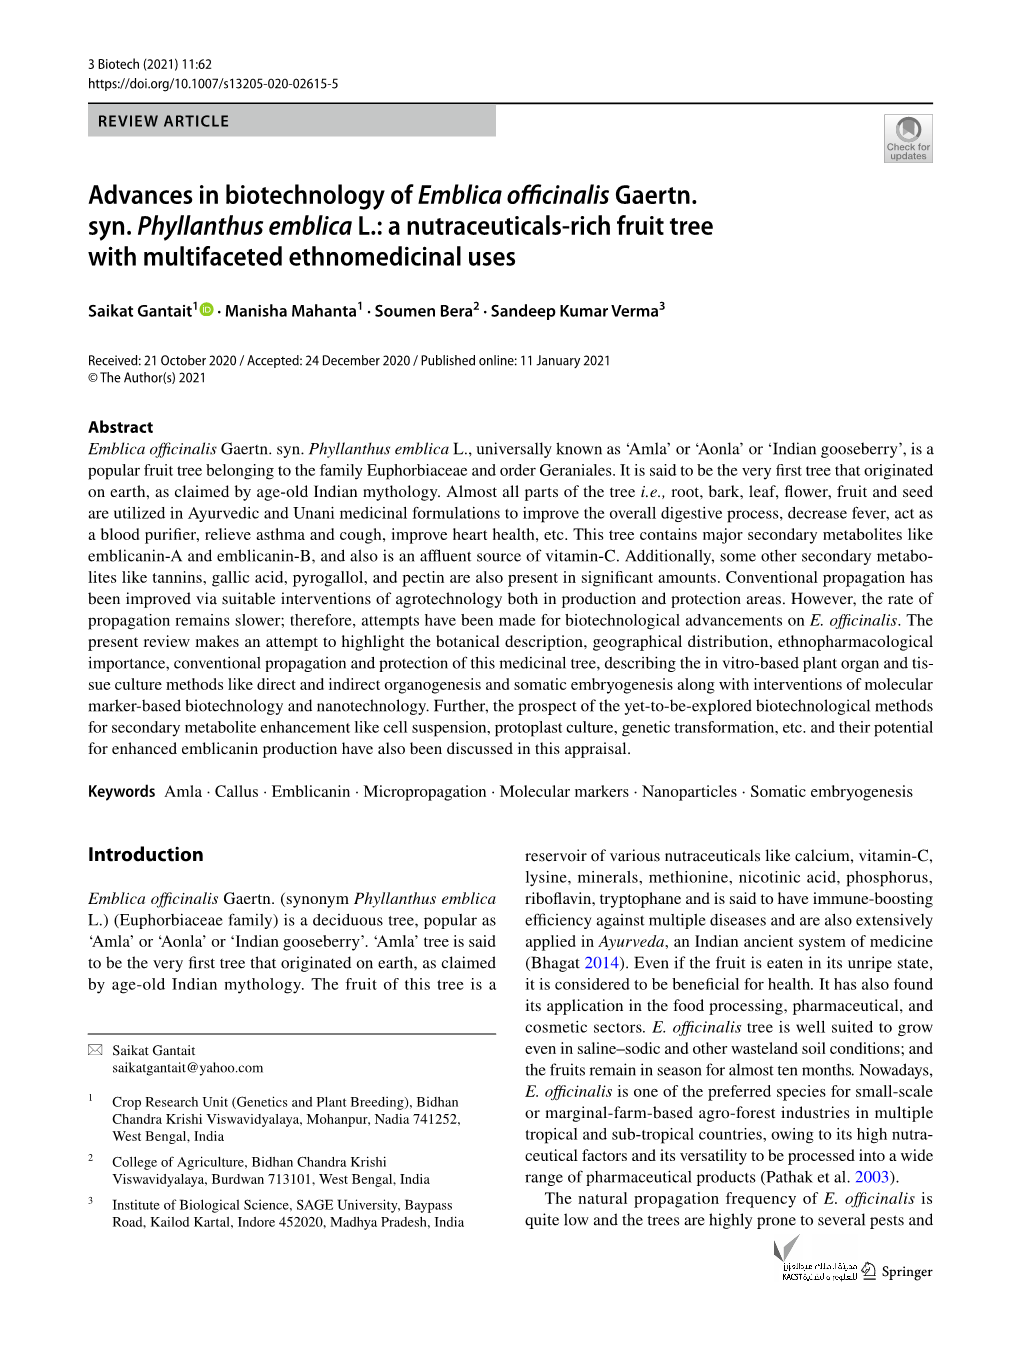 Advances in Biotechnology of Emblica Officinalis Gaertn. Syn. Phyllanthus